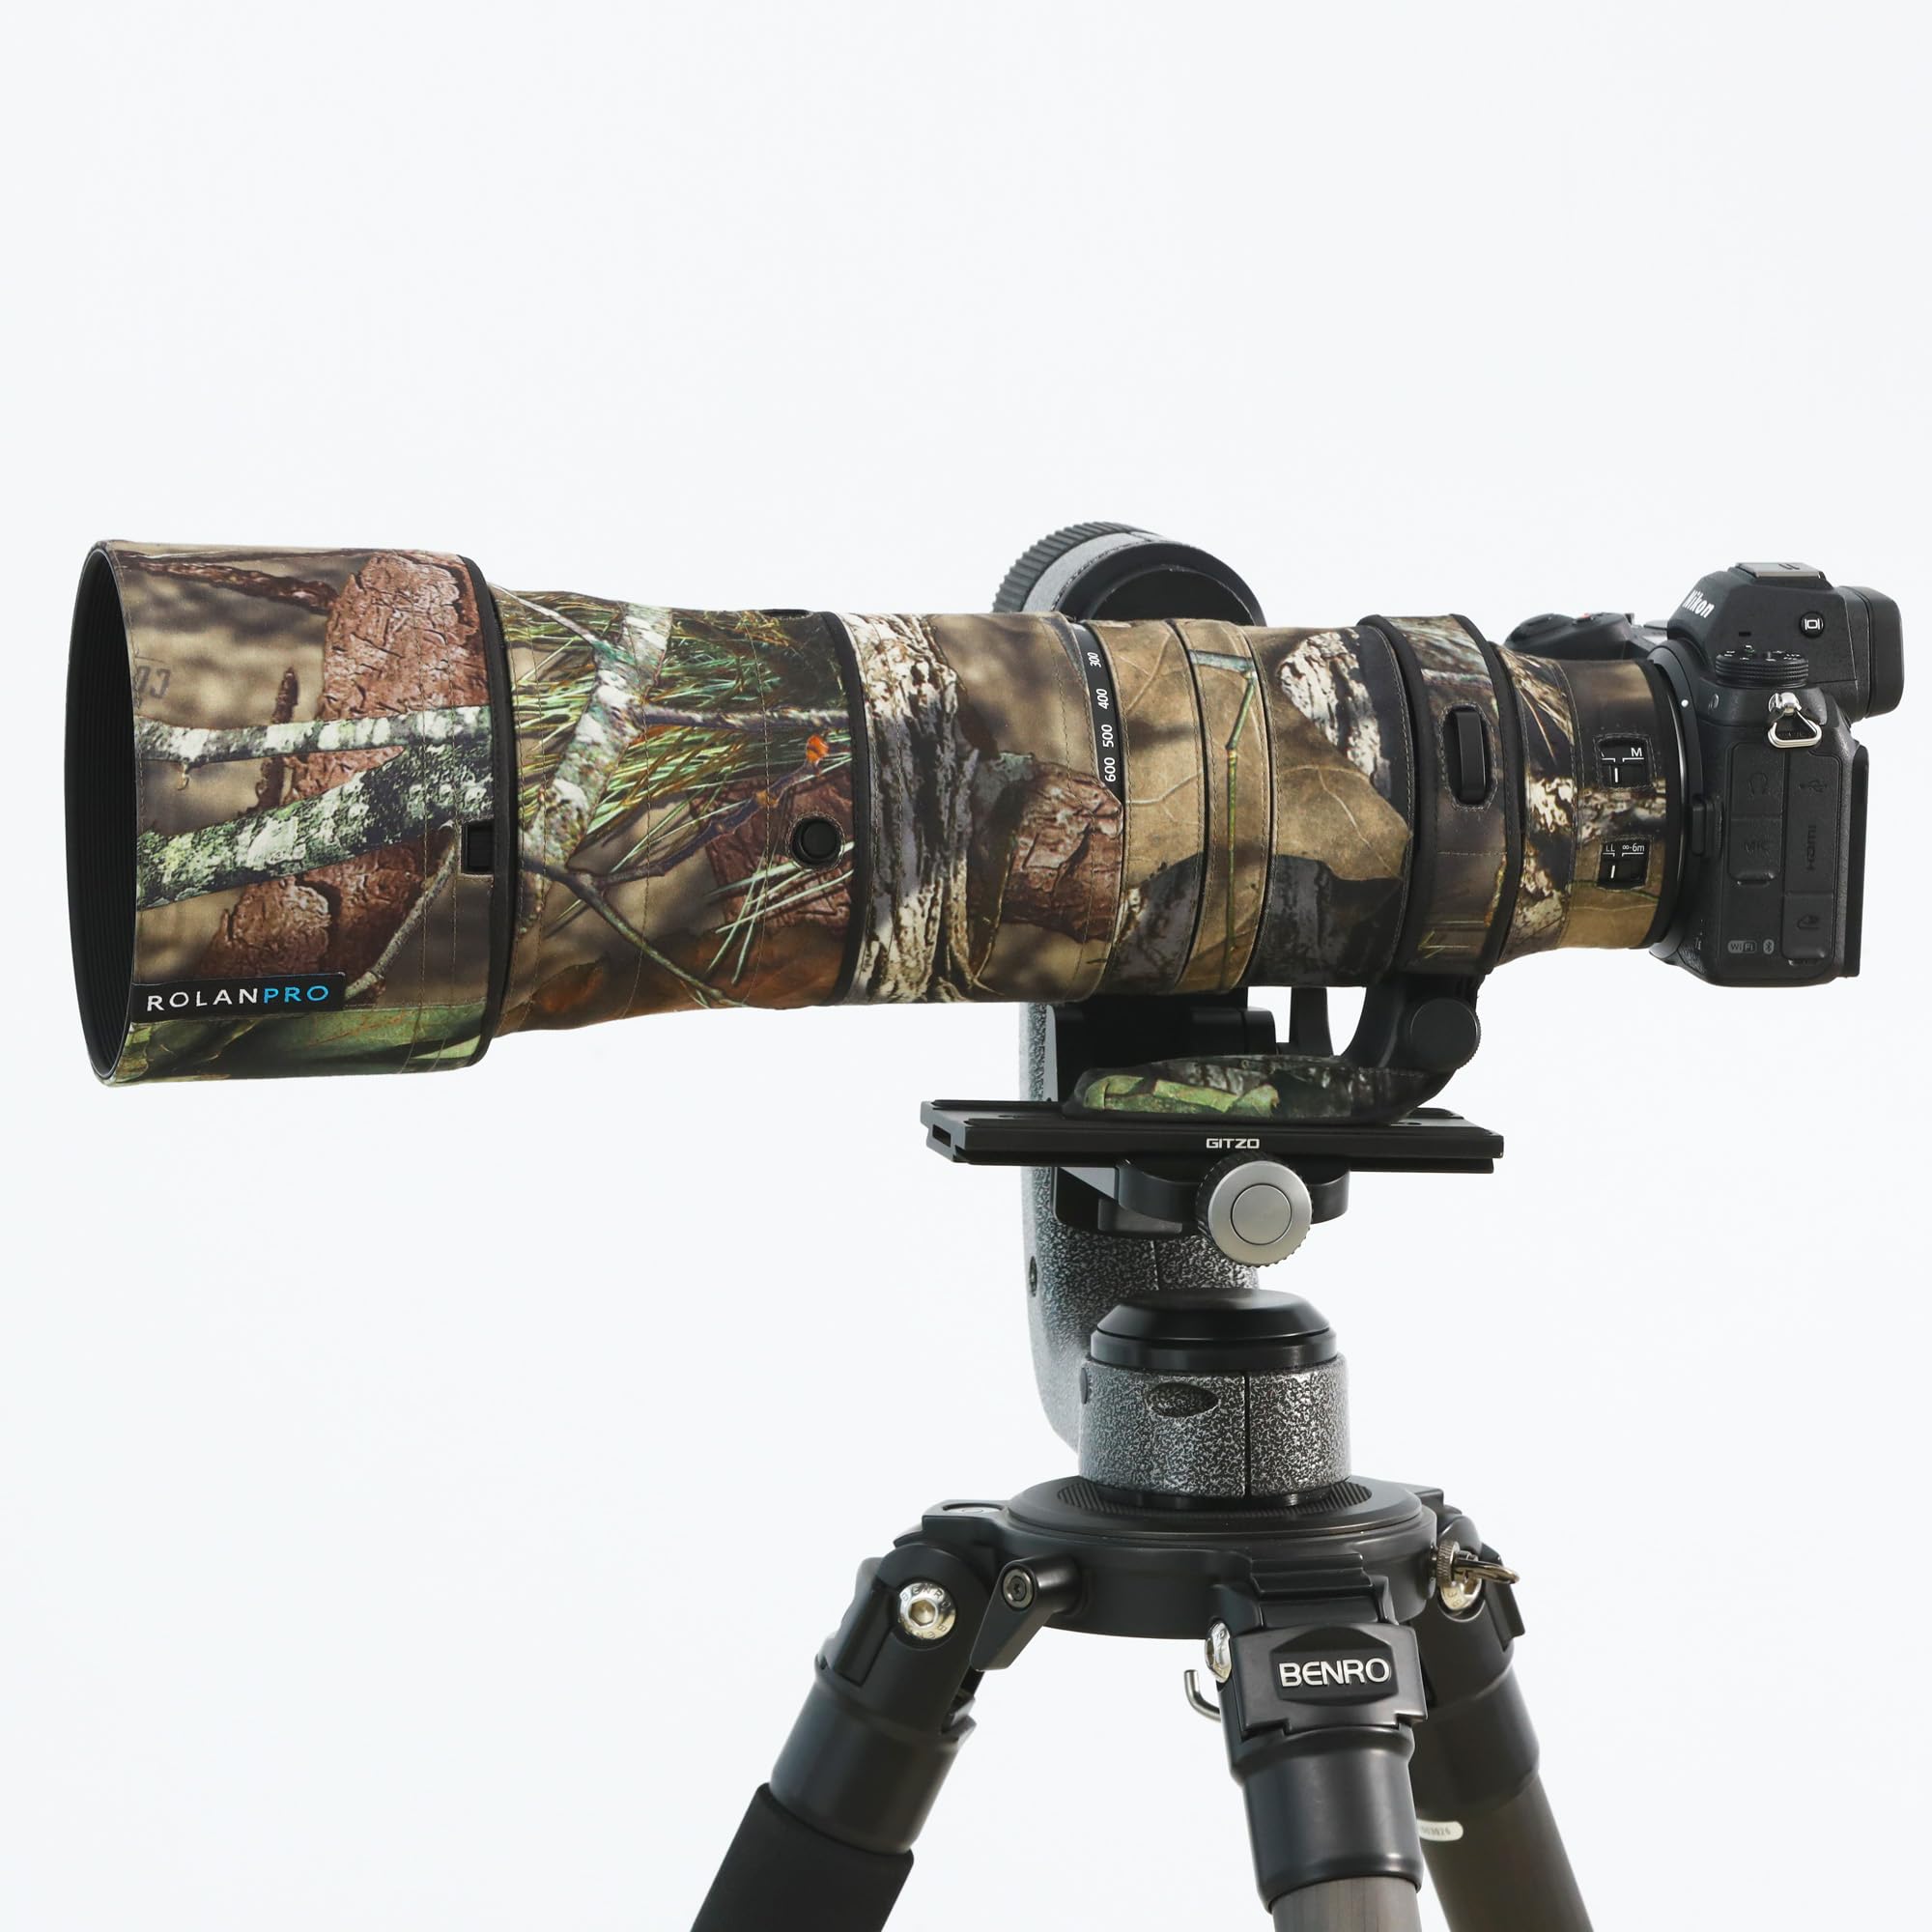 ROLANPRO Waterproof Lens Camouflage Coat for Nikon Z 180-600mm F/5.6-6.3 VR Rain Cover Lens Protective Sleeve Guns Case Clothing-#23 Brown Jungle Waterproof